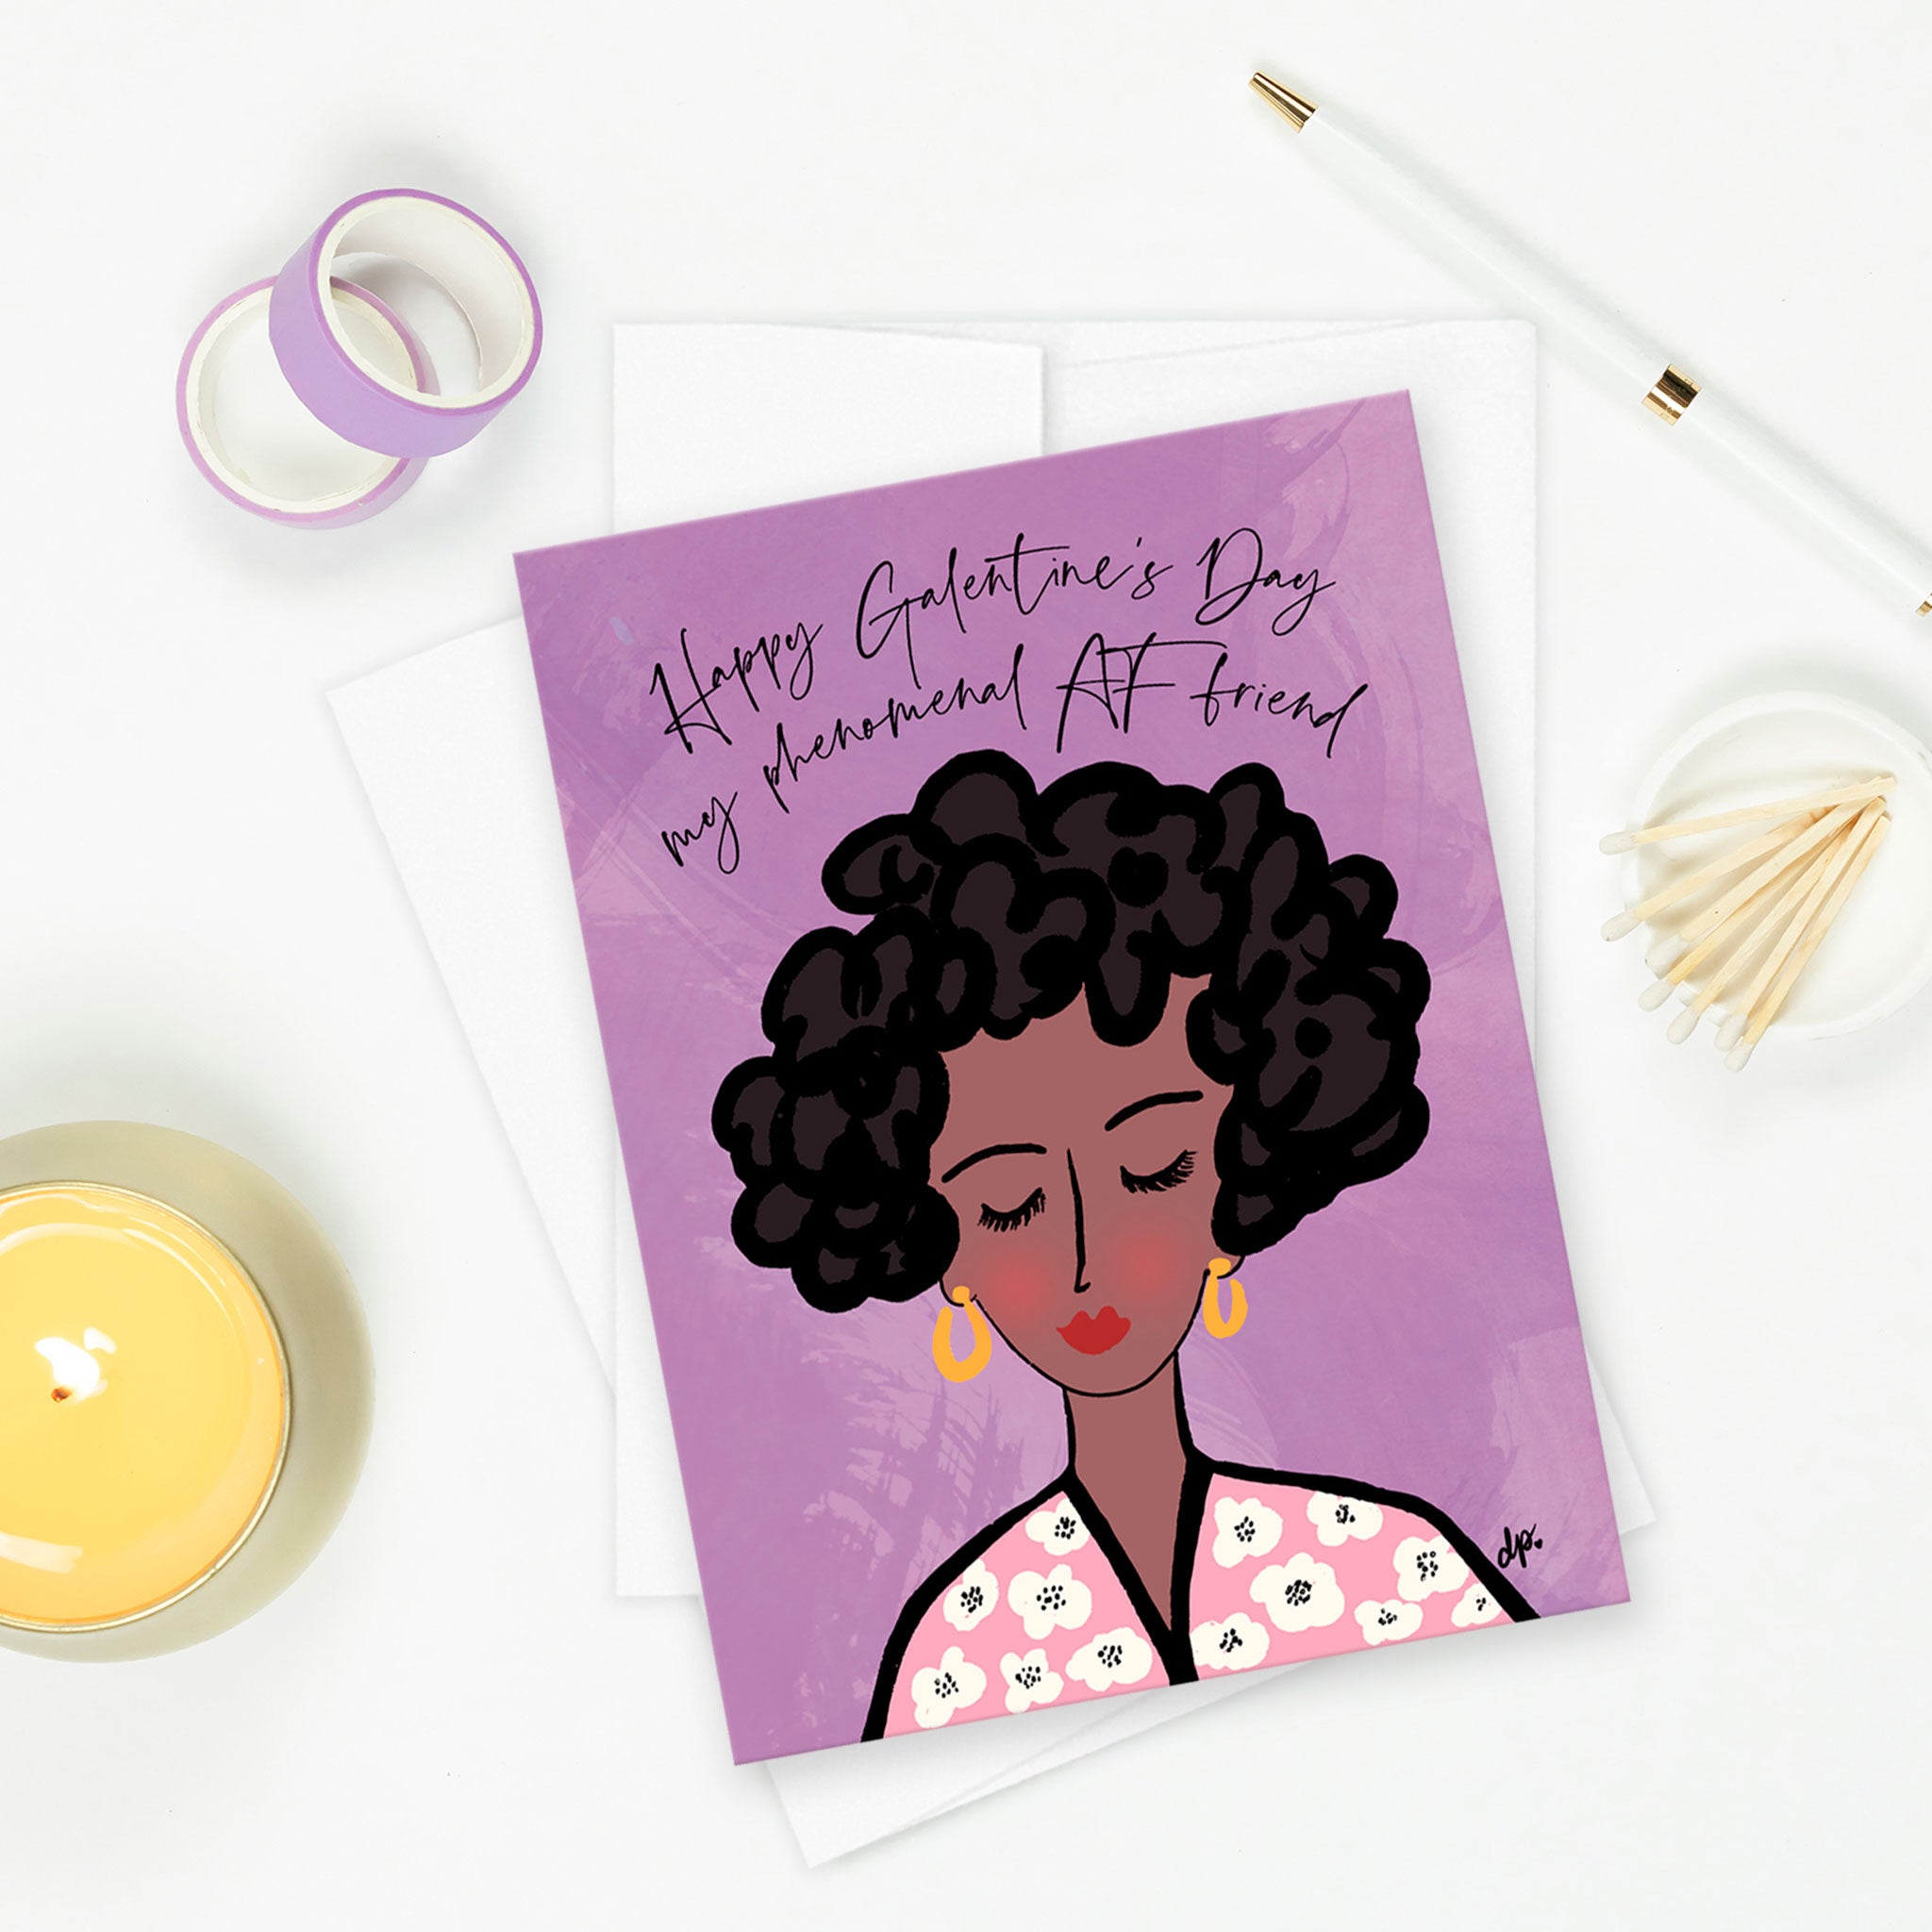 Phenomenal AF Friend Galentine Card by The Spotted Olive